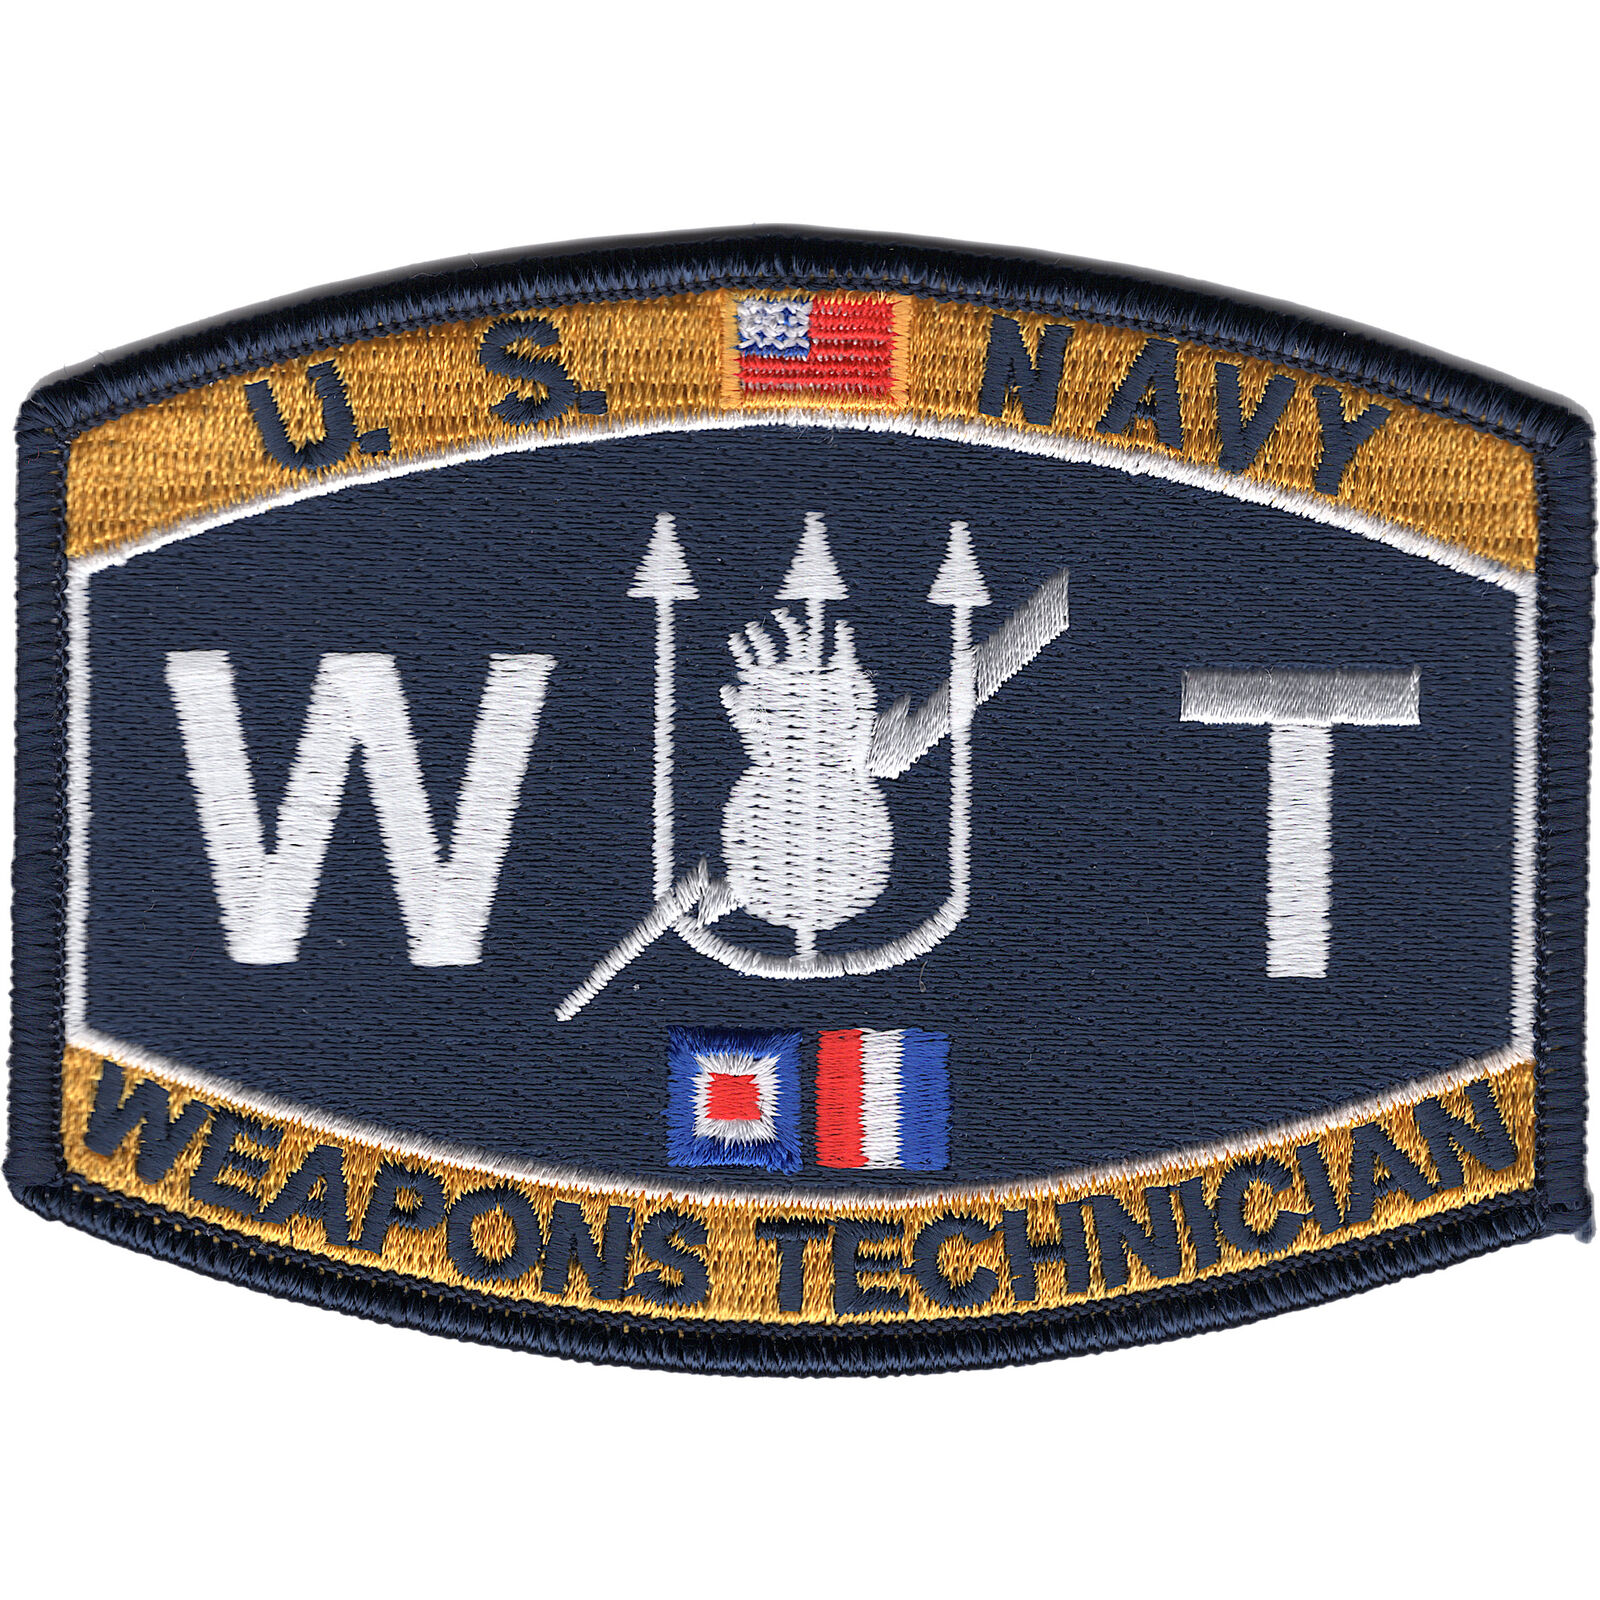 WT Weapons Technician Deck Rating Patch